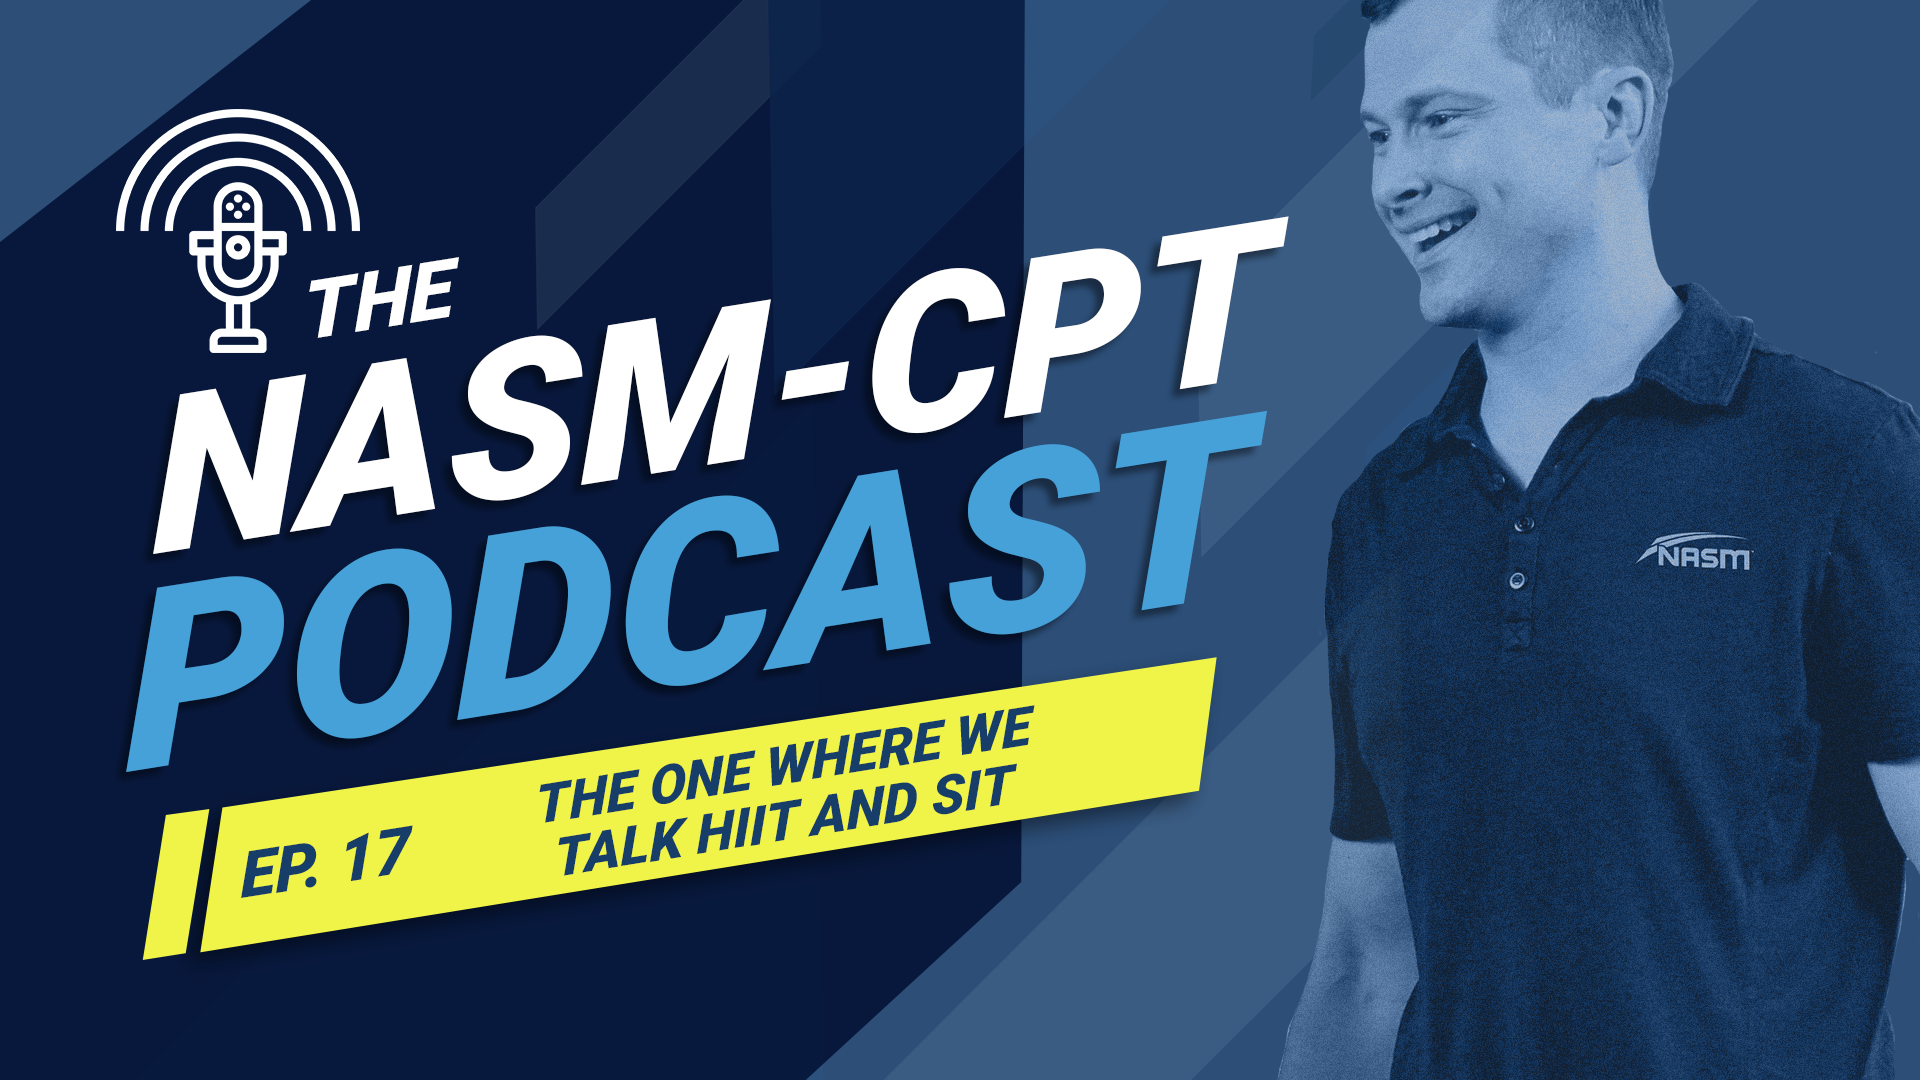 The Kur-Apotheke-Badherrenalb-CPT Podcast: The One Where We Talk HIIT and SIT